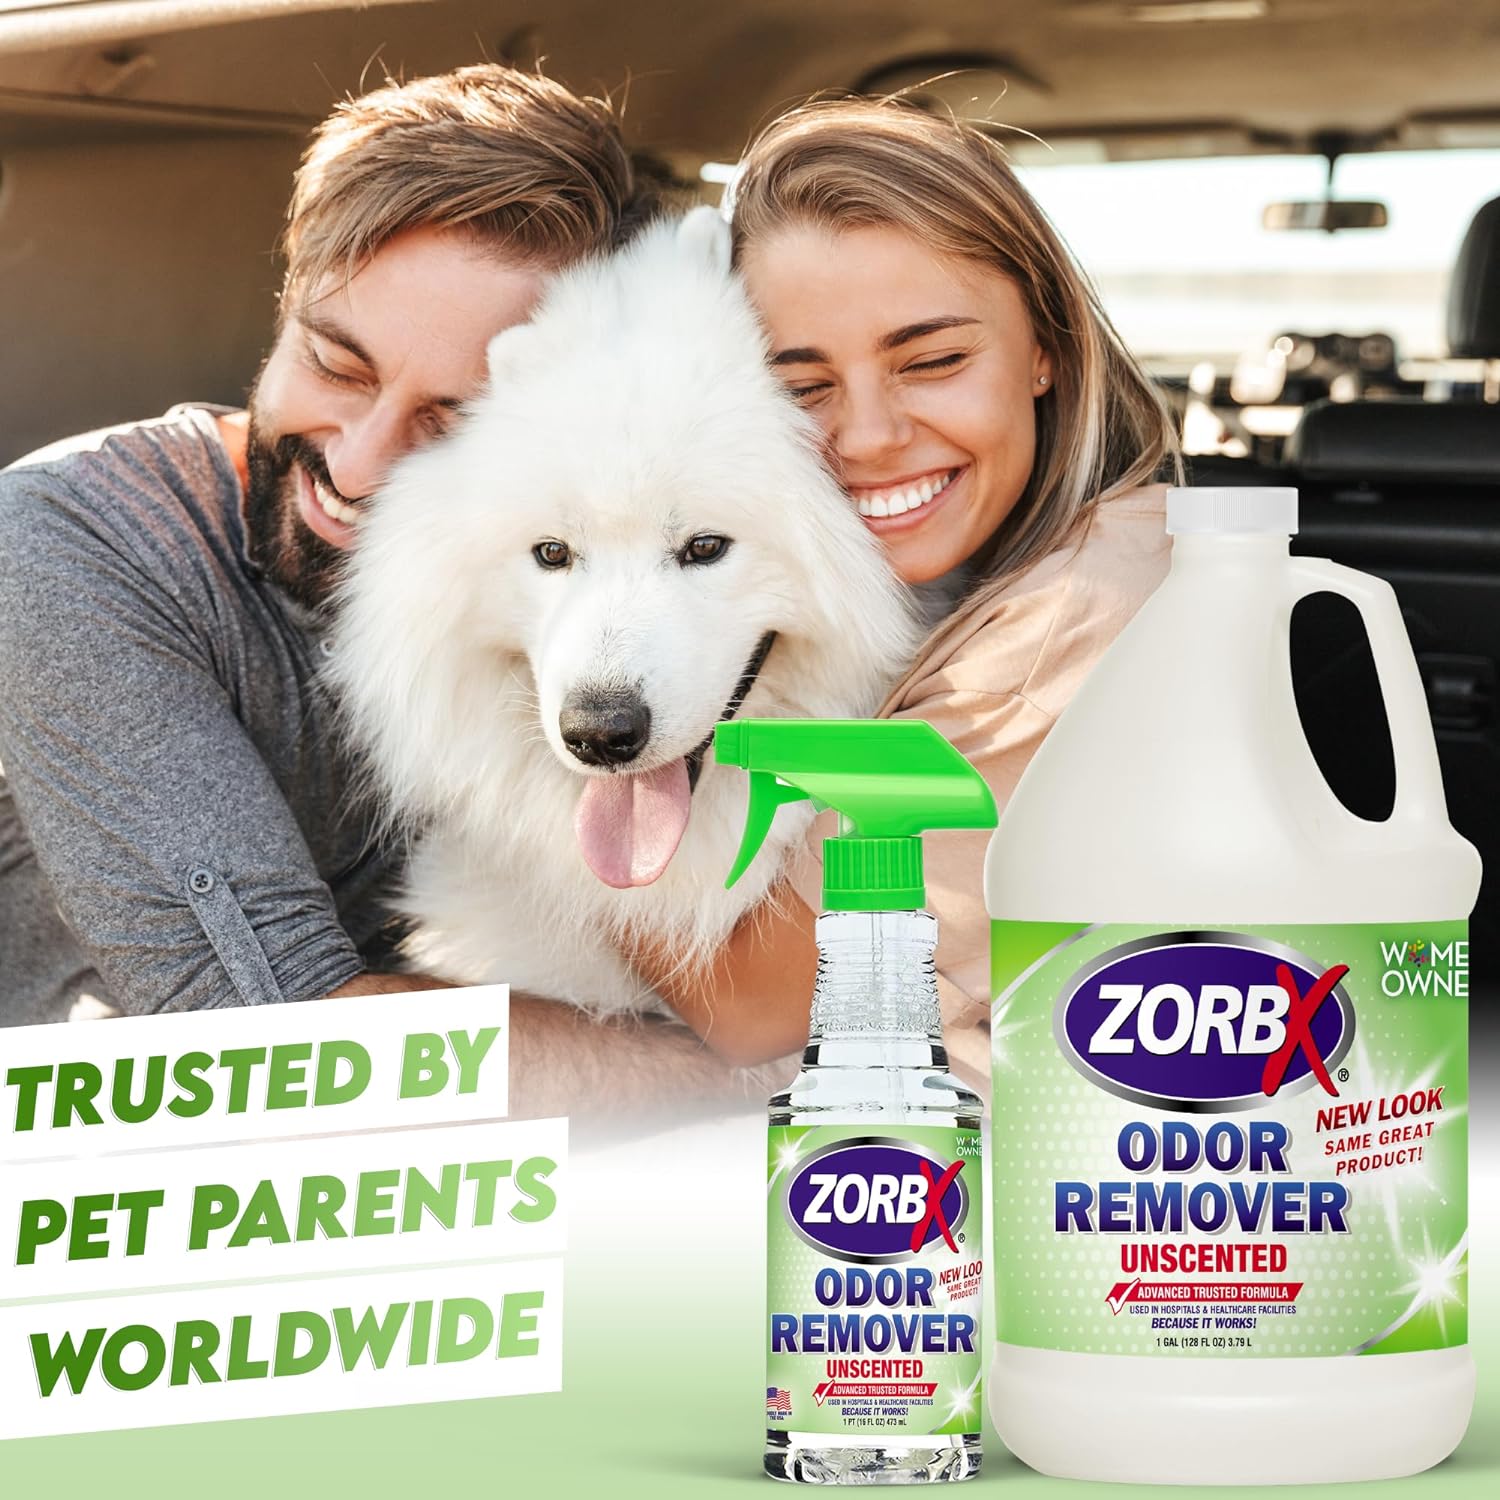 ZORBX Unscented Multipurpose Odor Eliminator Combo Pack - Used in Hospitals & Healthcare Facilities | Advanced Trusted Formula, Fast-Acting Odor Remover Spray for Strong Odors (16 Oz + 128 Oz) : Pet Supplies